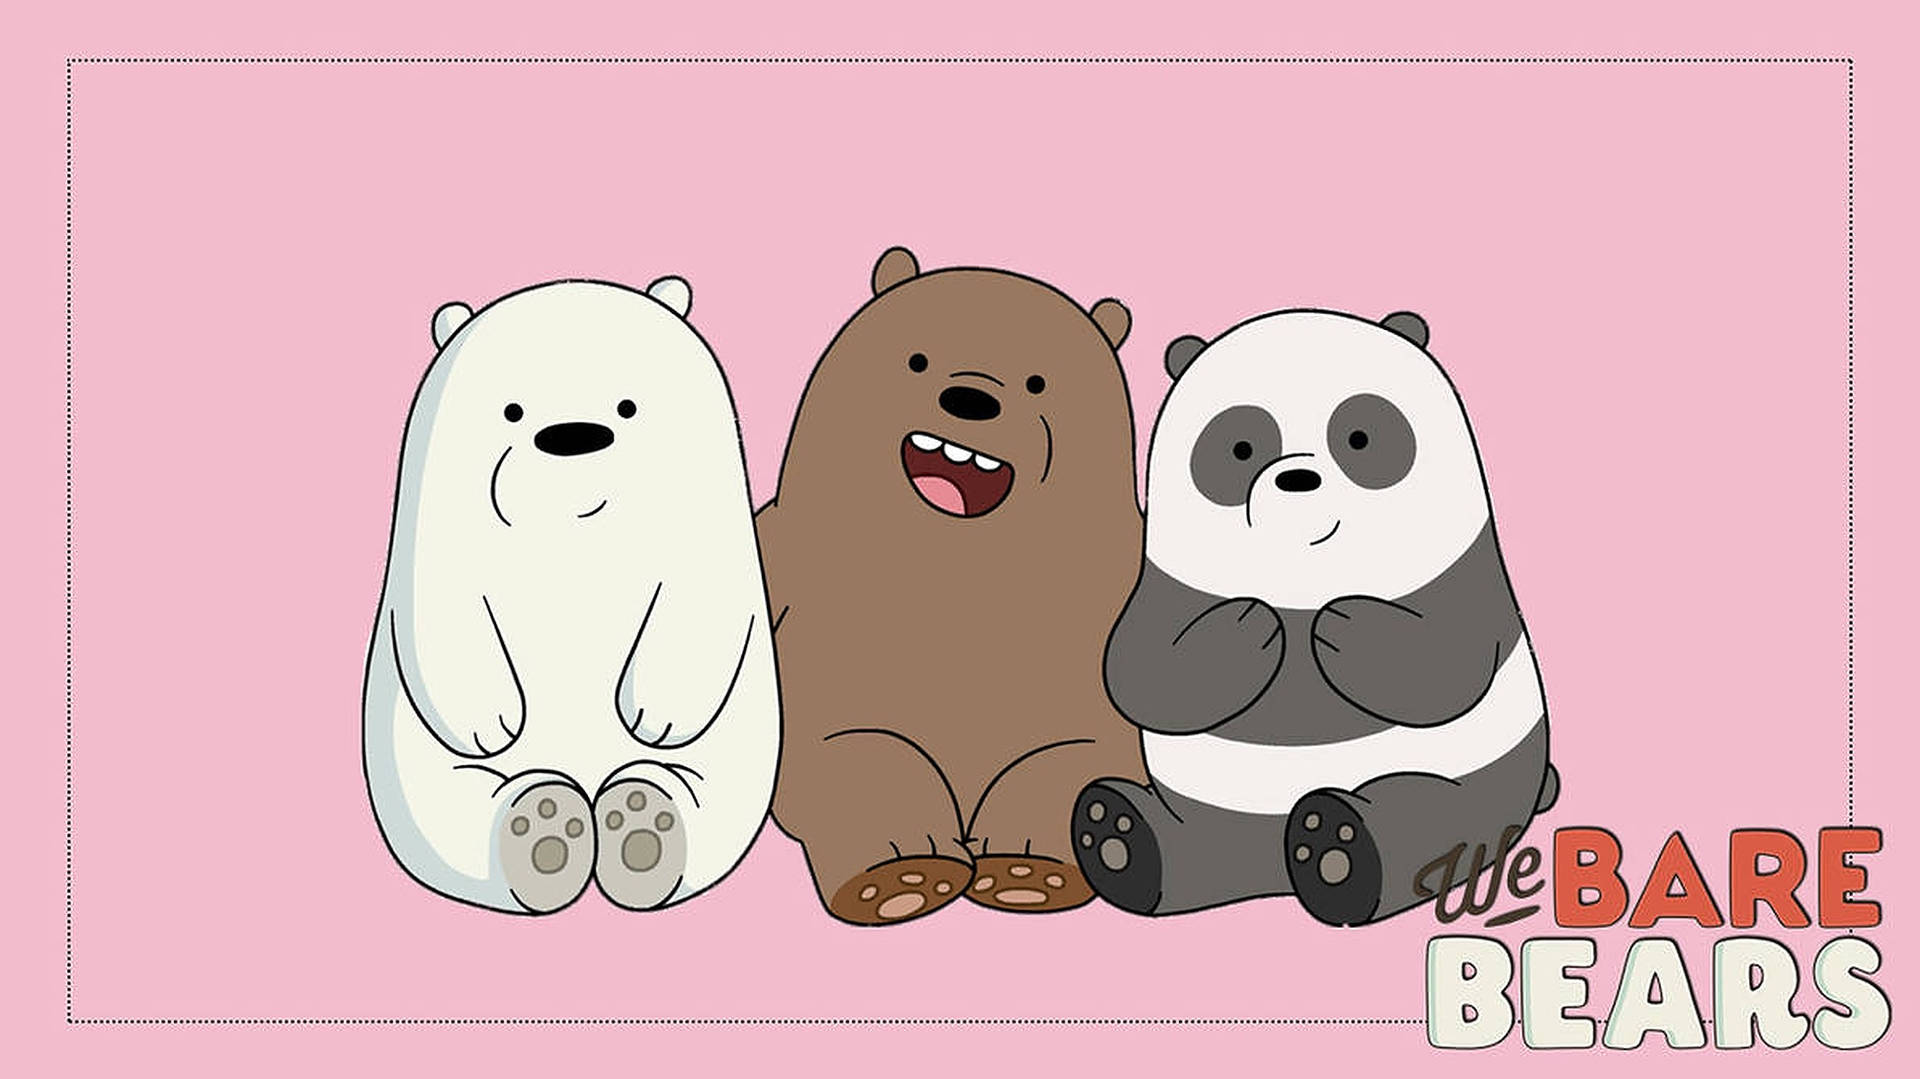 Free Three Bears Wallpaper Downloads, [100+] Three Bears Wallpapers for  FREE 